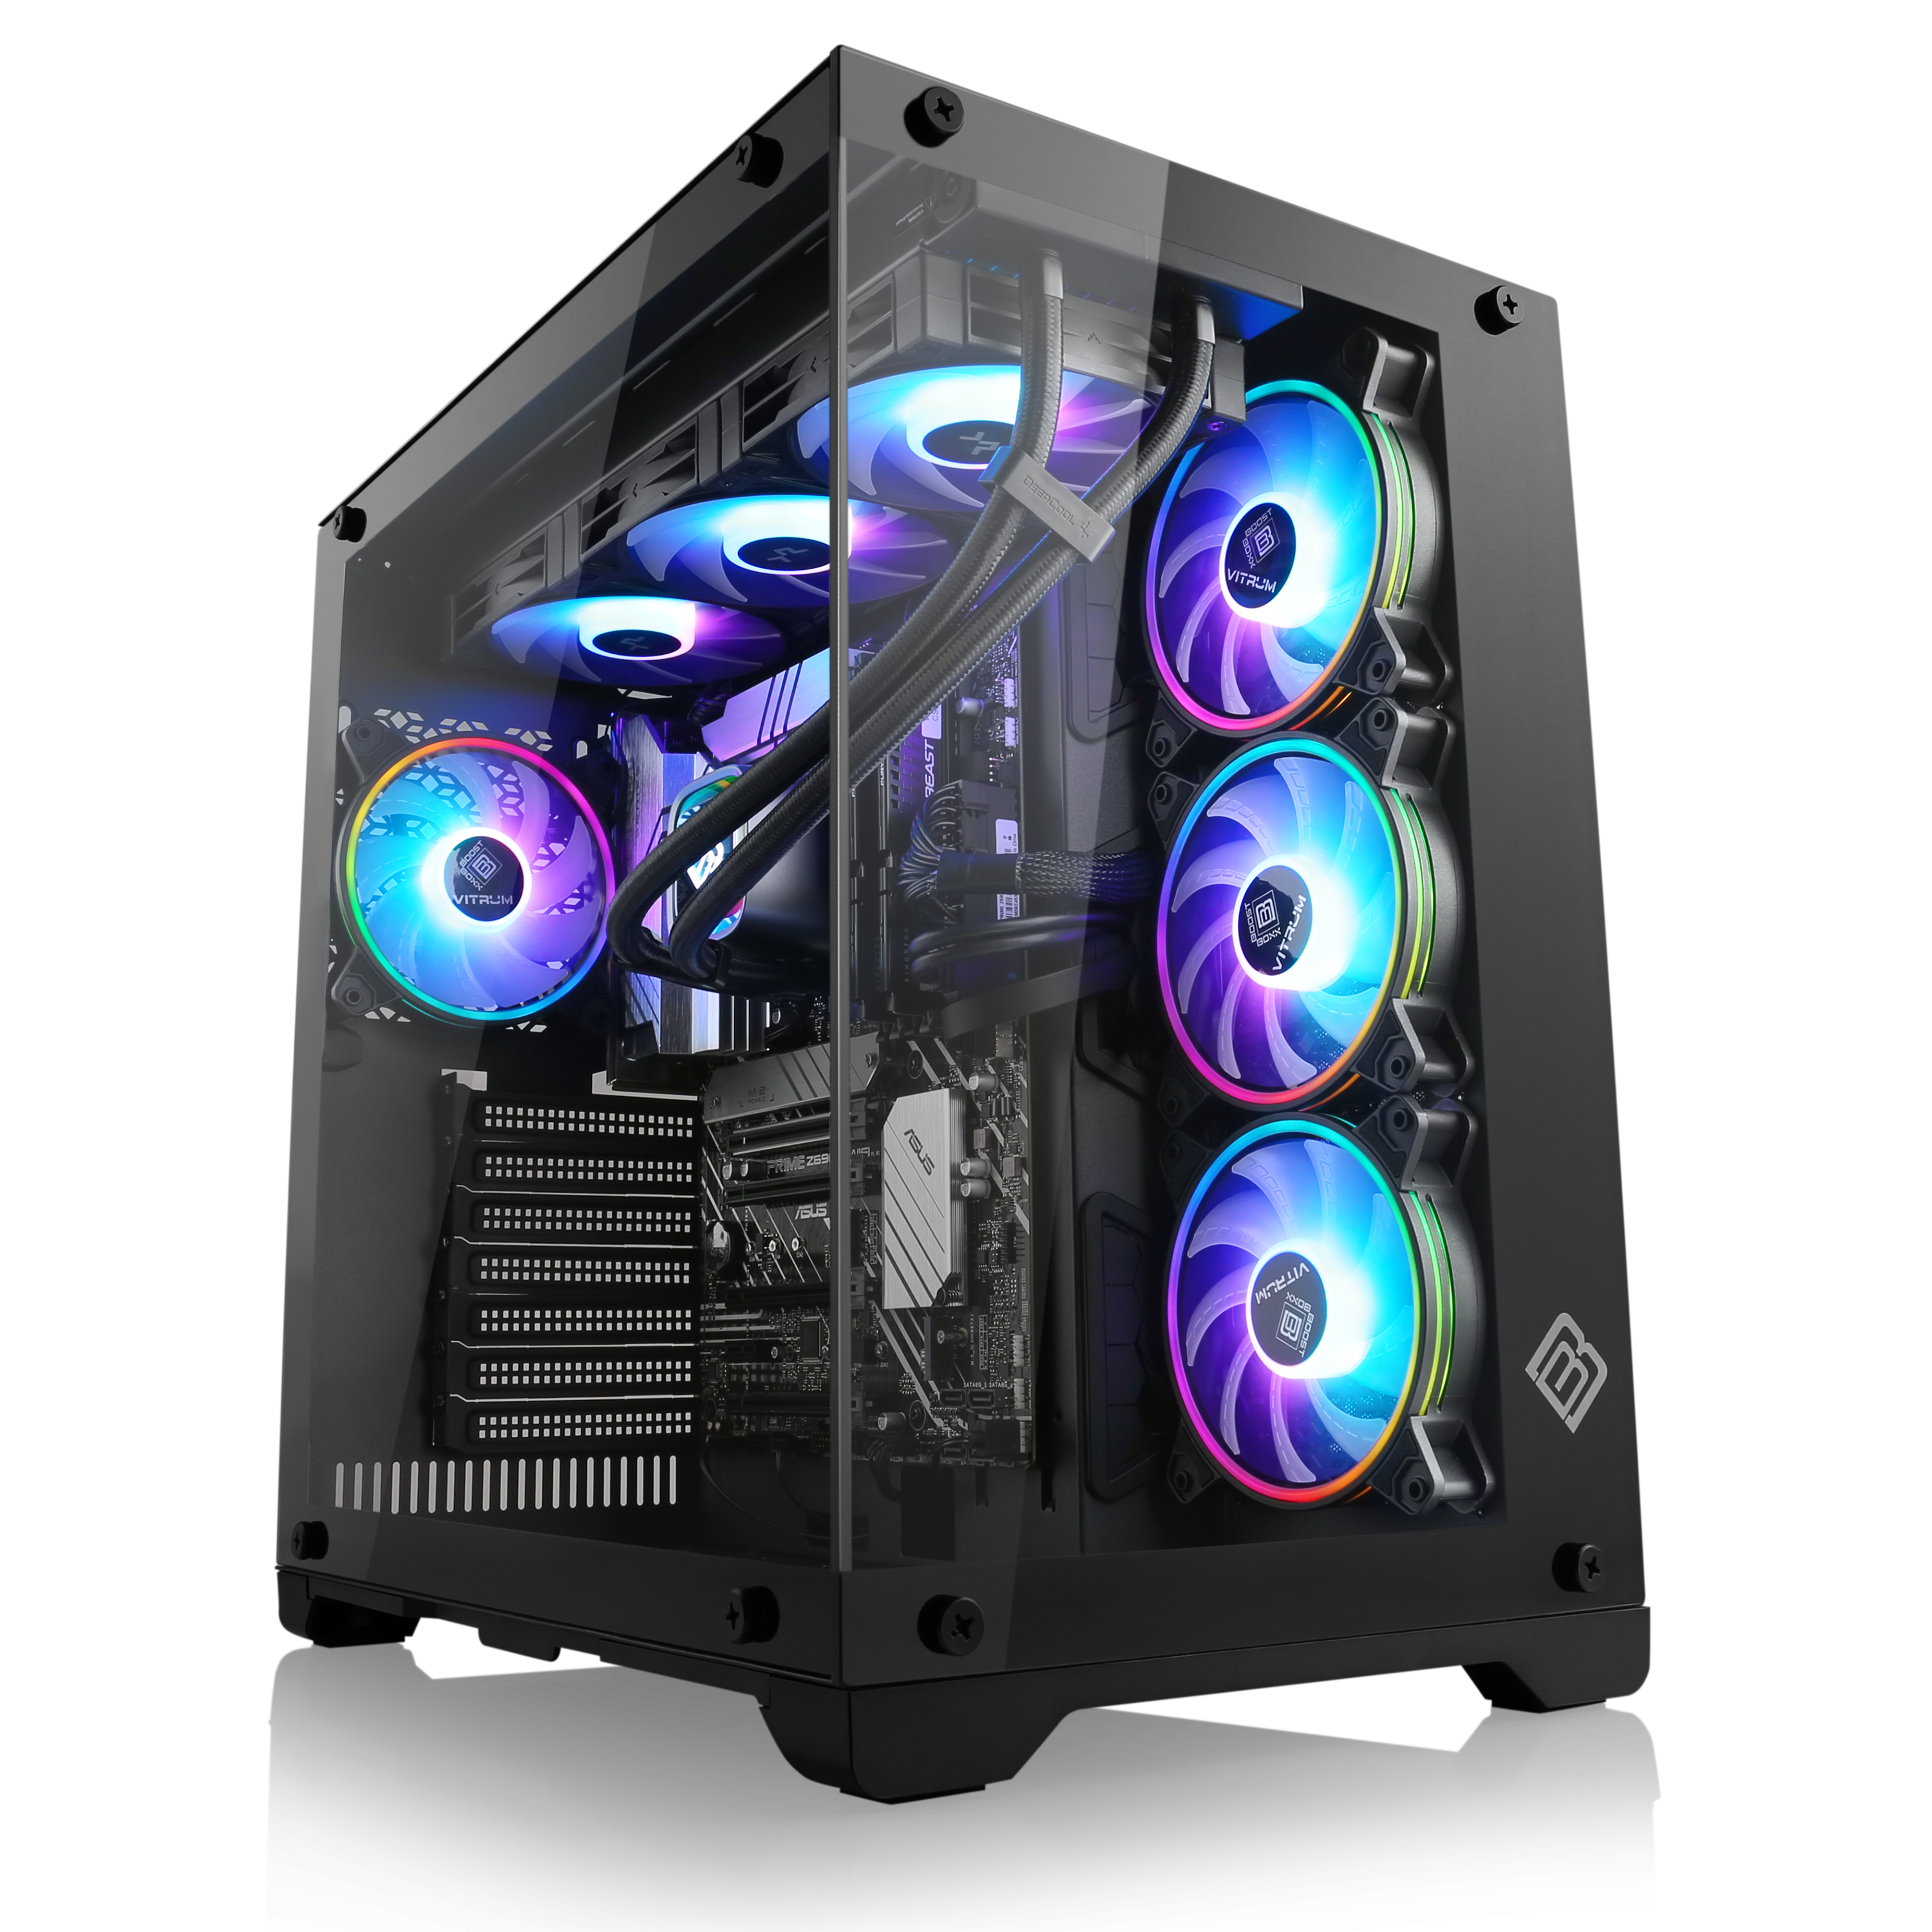 This cyberpunk mini PC adds a little RGB flavor to your workspace